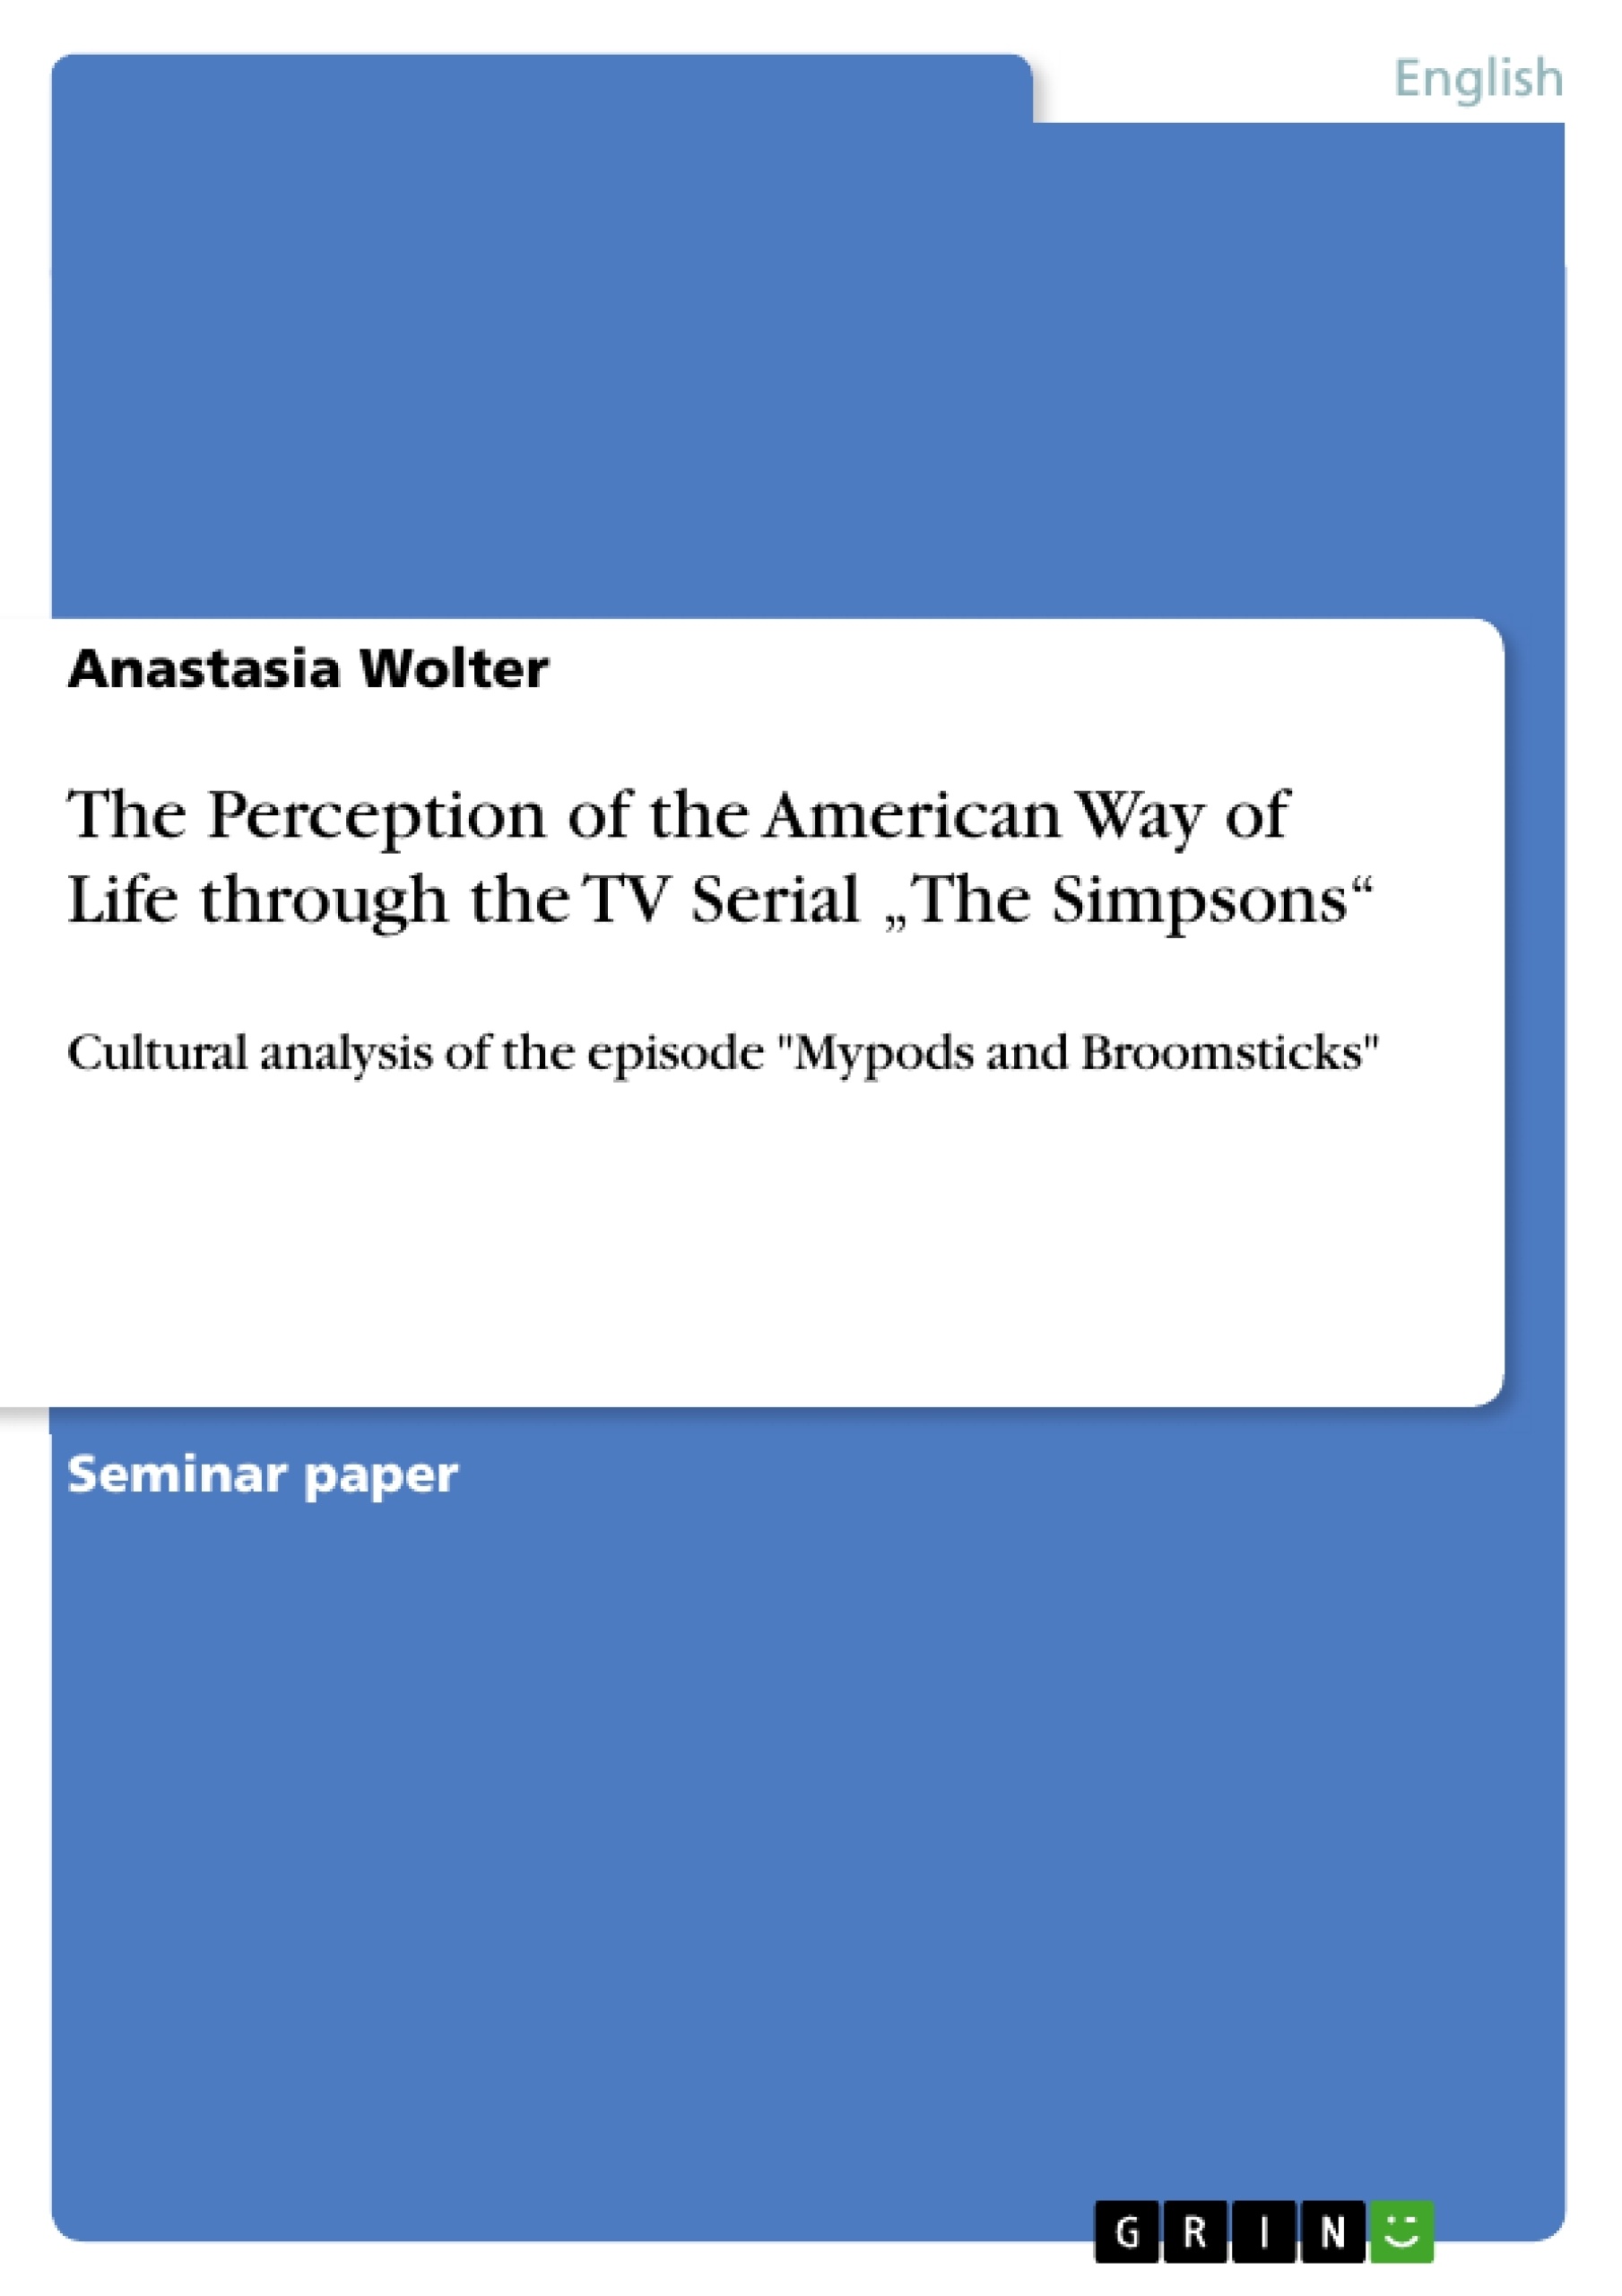 Title: The Perception of the American Way of Life through the TV Serial „The Simpsons“